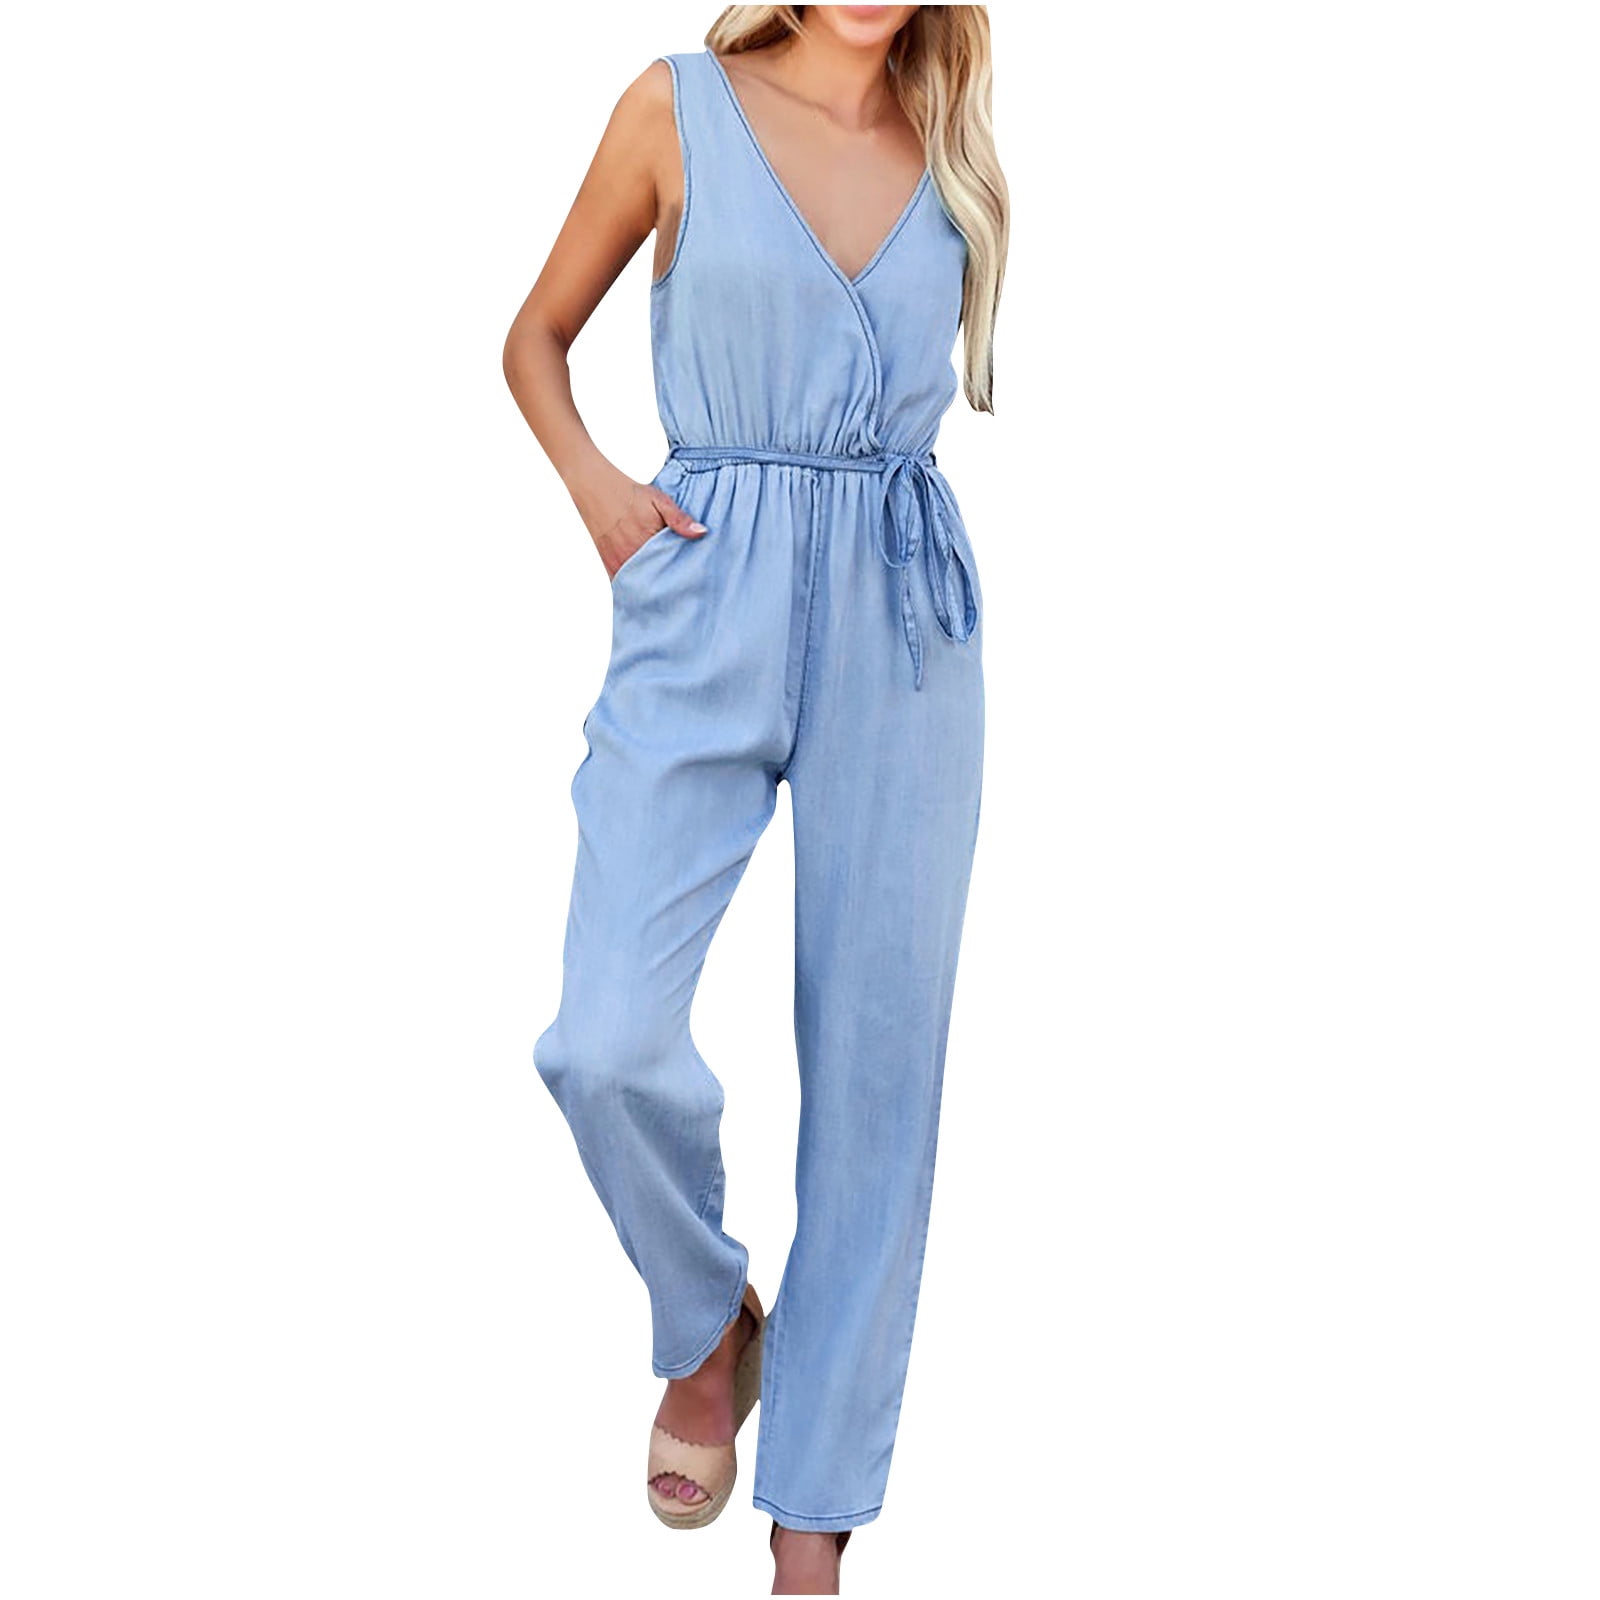 Denim Jumpsuit for Women V Neck Sleeveless Button Elastic Waist Drawstring  Summer Casual Jeans Romper with Pockets (Small, Navy) 